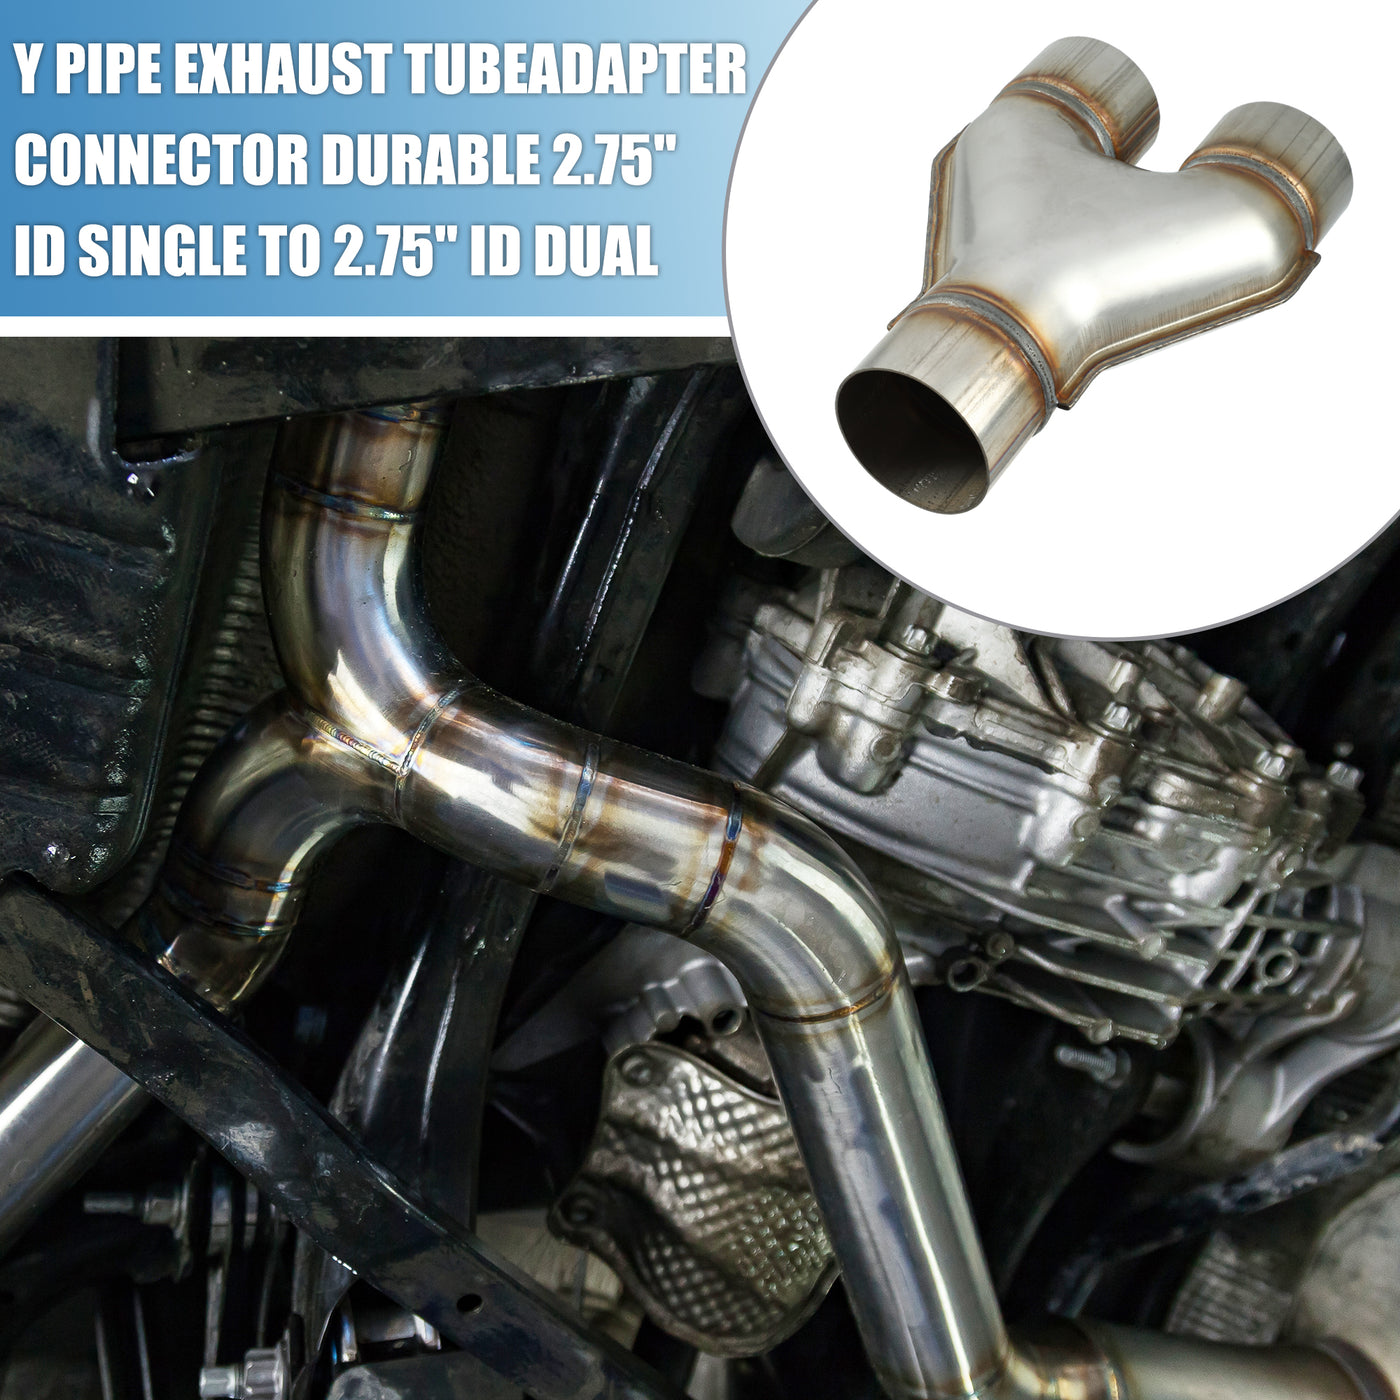 A ABSOPRO Y Pipe Exhaust Tube Adapter Connector Durable 2.75" ID Single to 2.75" ID Dual Exhaust Adapter Connector 10 Inch Overall Length T409 Stainless Steel Silver Tone